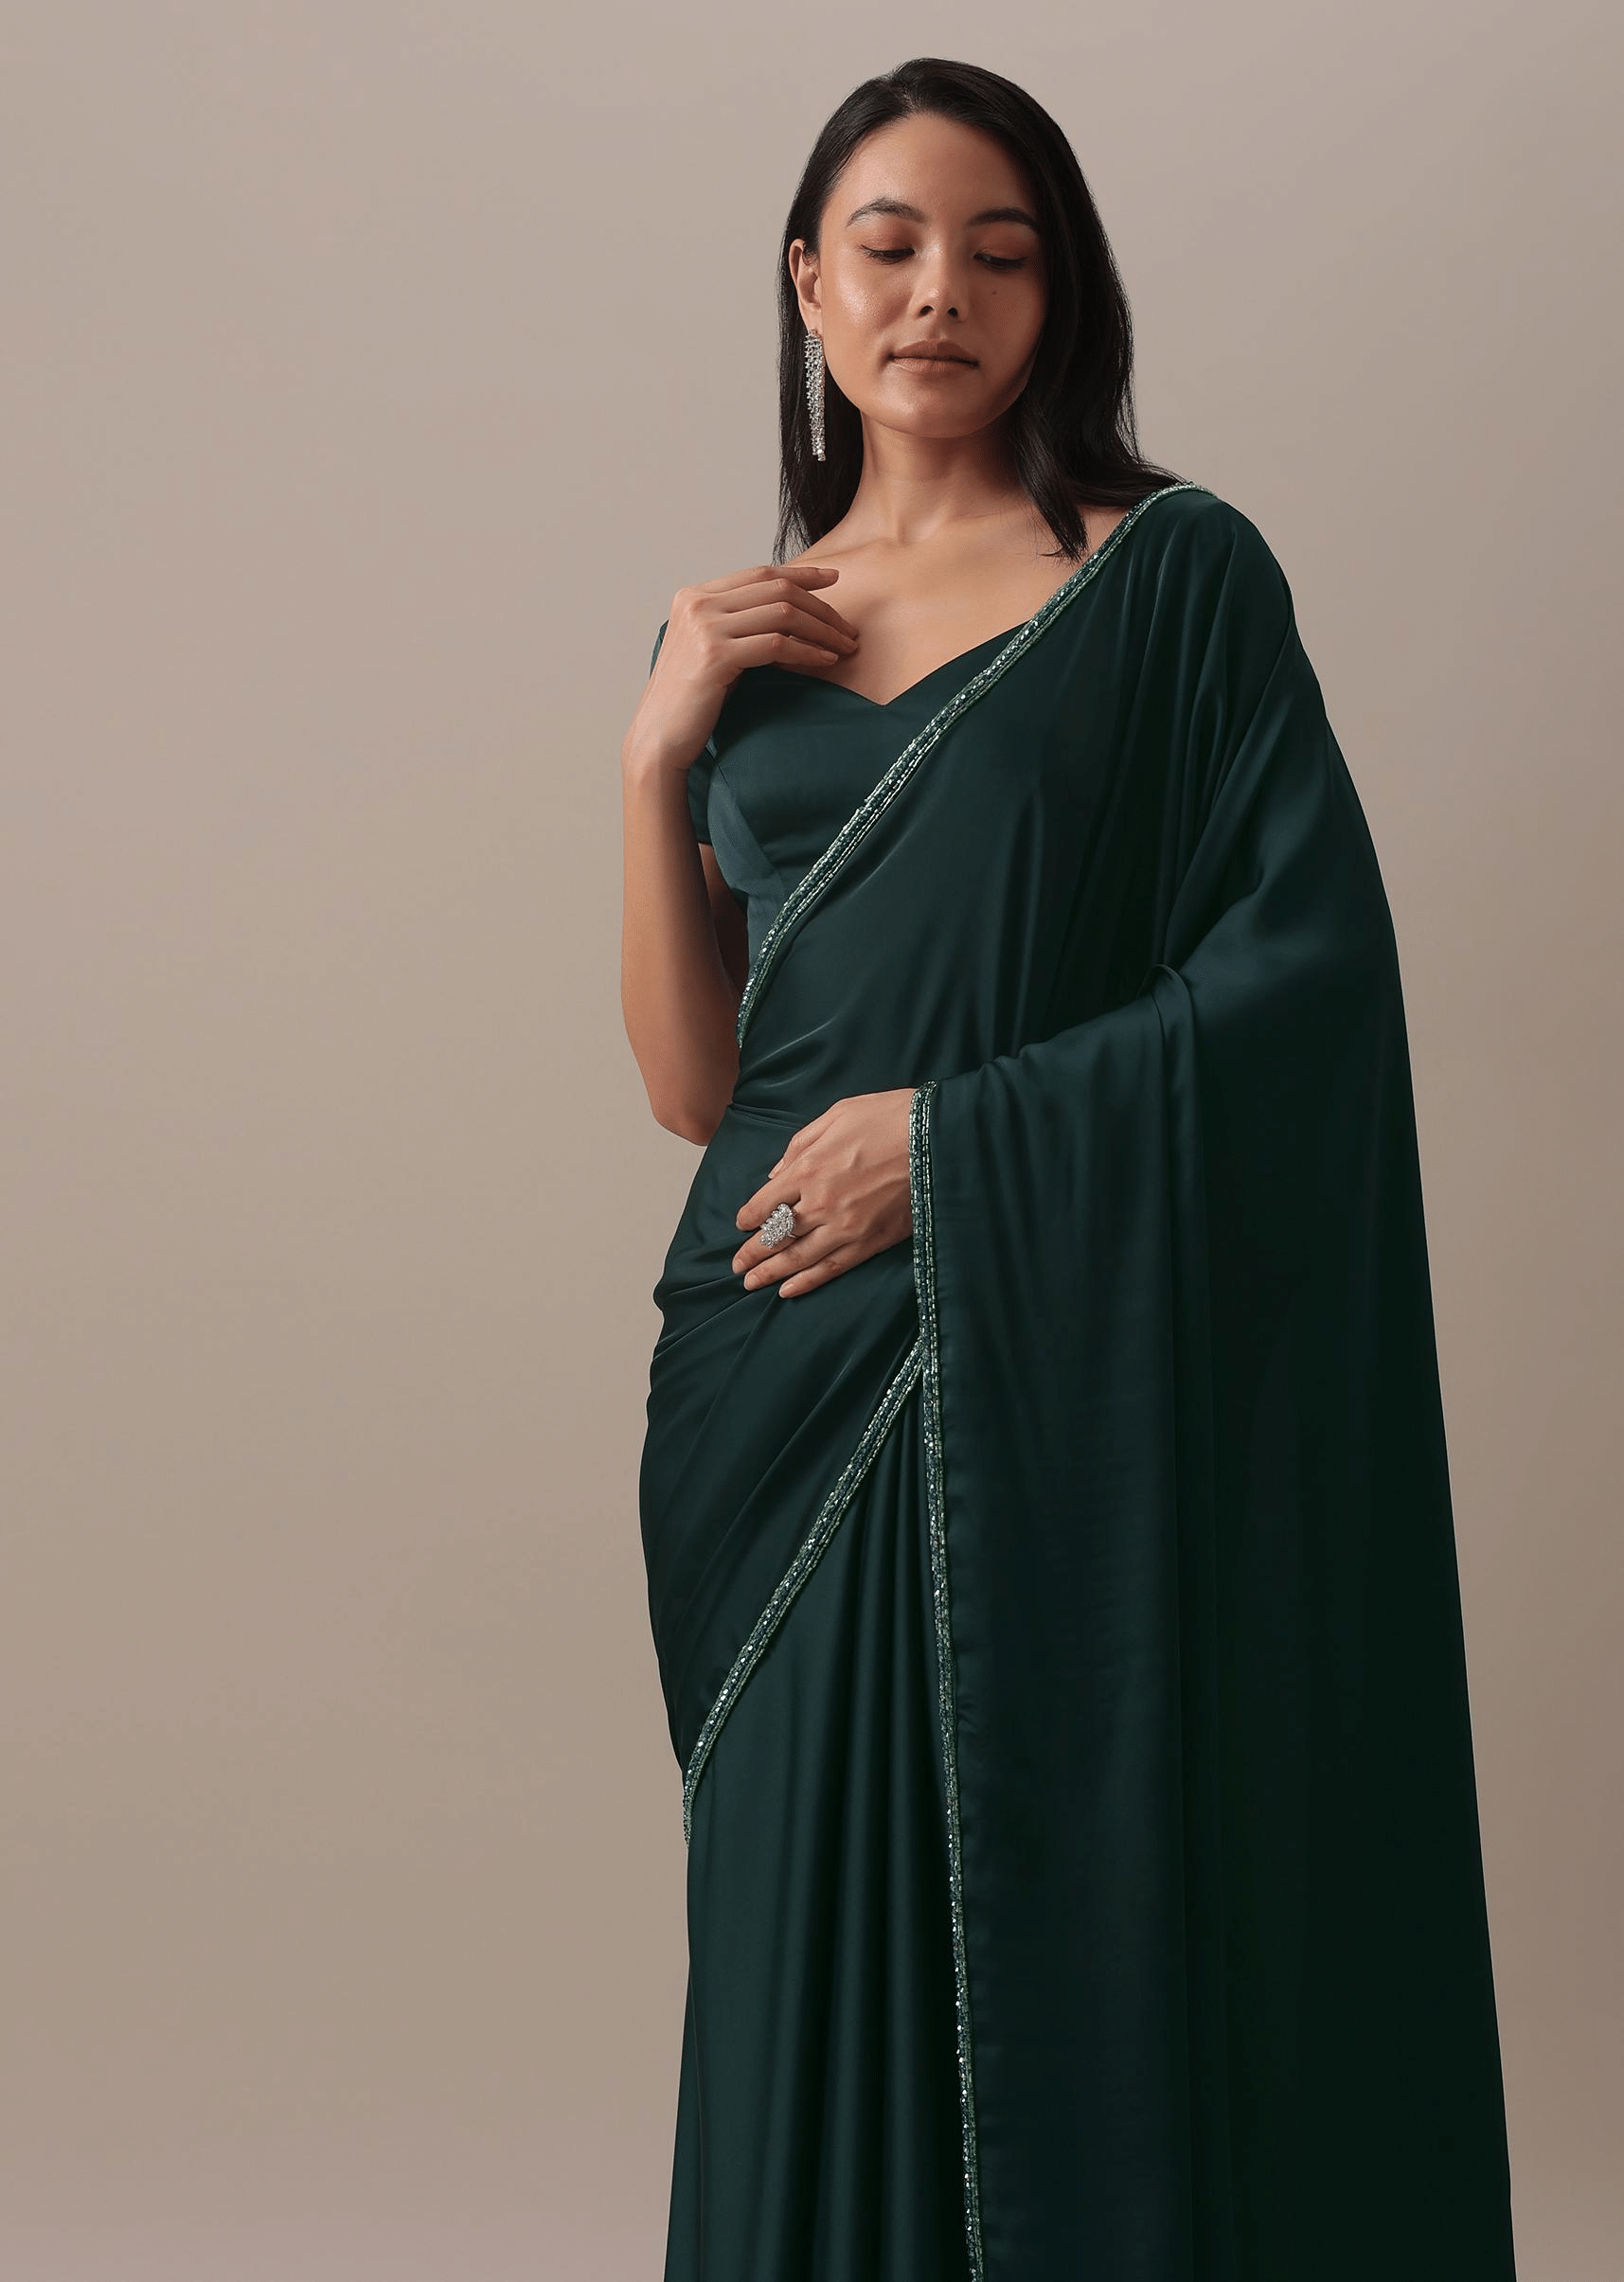 https://newcdn.kalkifashion.com/media/catalog/product/t/e/teal_green_plain_saree_and_stitched_blouse_with_cut_dana_lace_in_satin-sg165358_2_.png